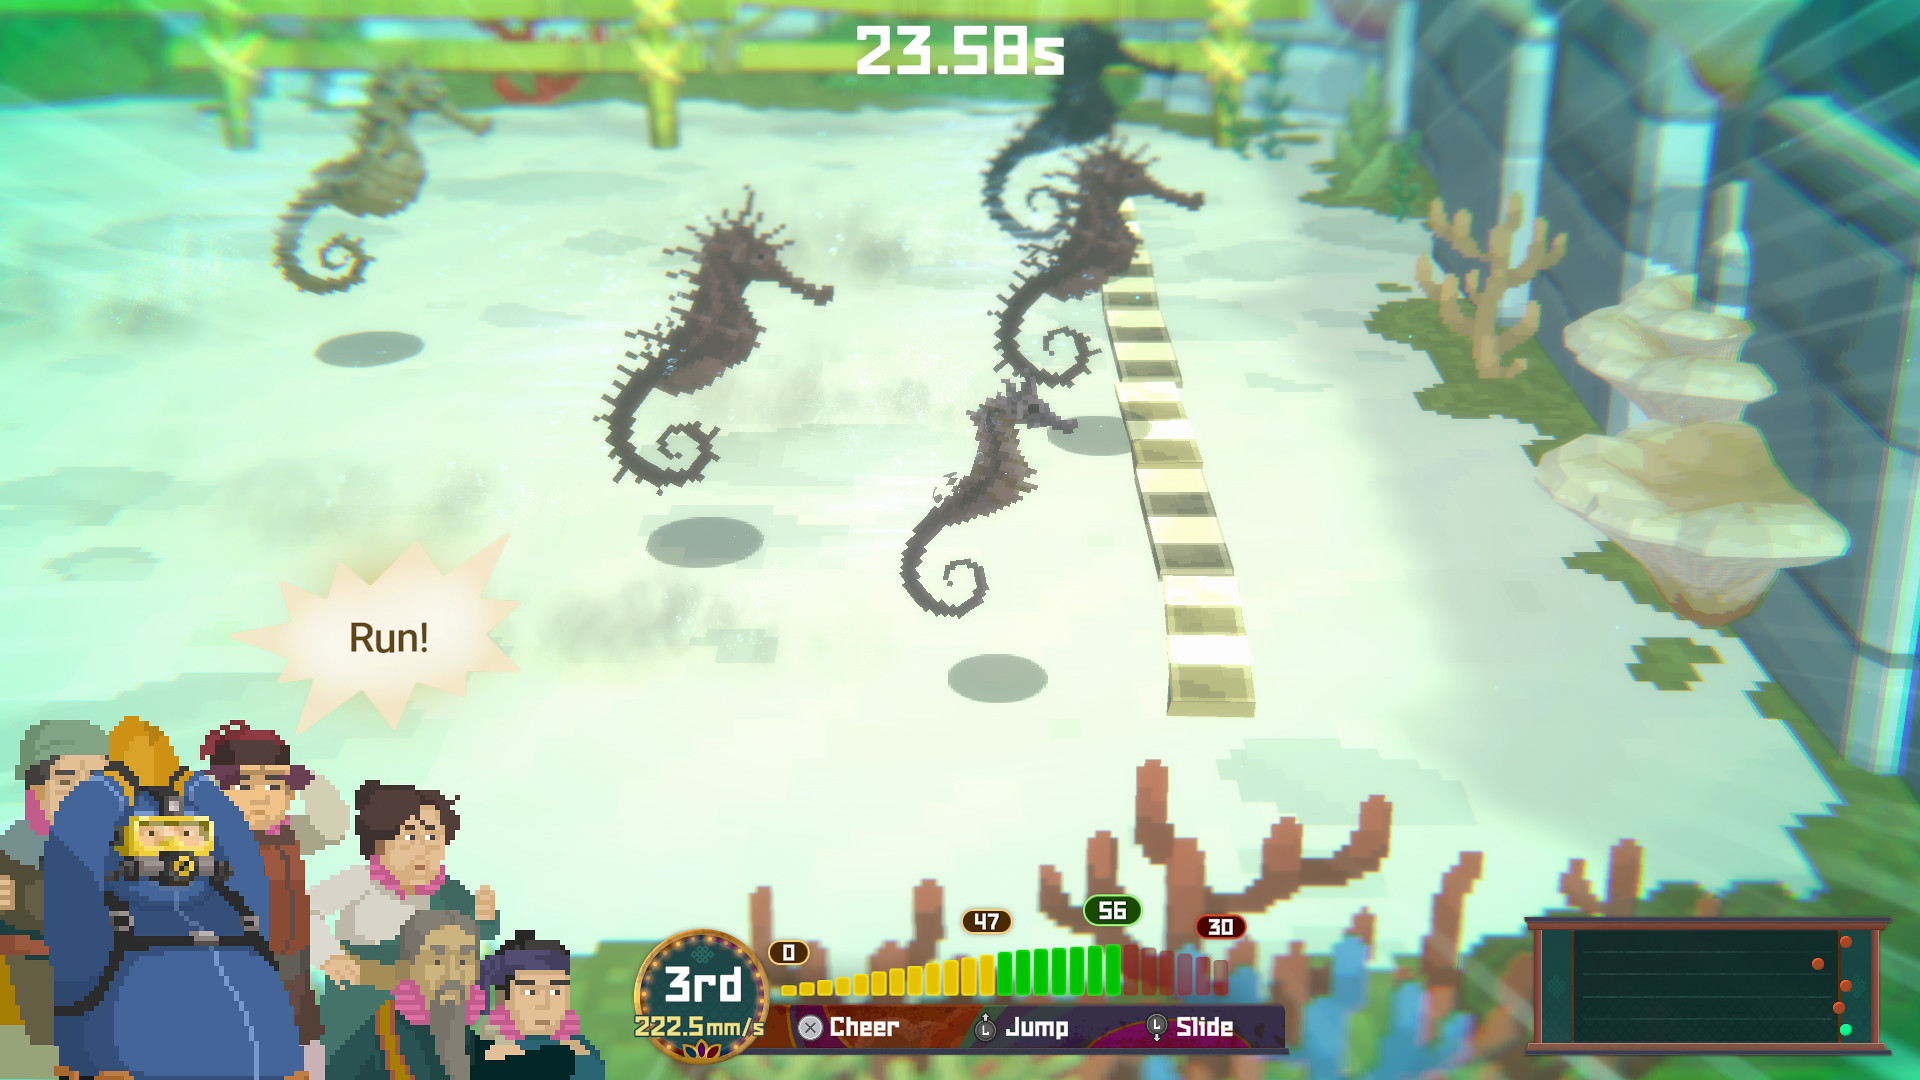 An example of a minigame shows a seahorse race, as five marine fish gallop towards a finish line while Dave and other characters watch from the sidelines. The UI at the bottom the screen registers your seahorse’s position in the race, as well as button prompts: X to Cheer, up on the left stick to Jump, and down on the same stick to Slide.